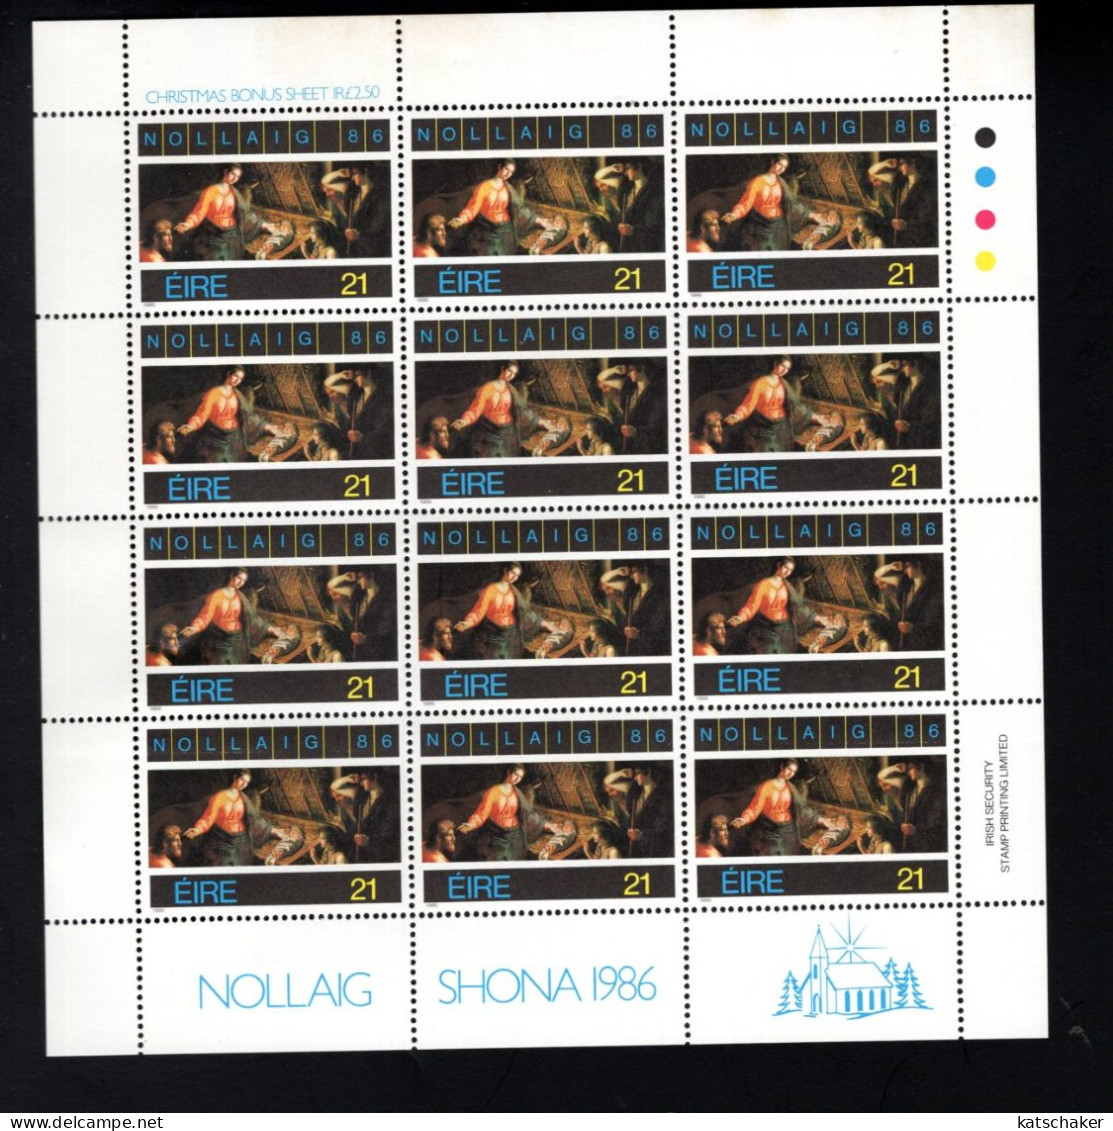 1999459424 1986  SCOTT 677 (XX) POSTFRIS  MINT NEVER HINGED - CHRISTMAS - ADORATION OF THE SHEPPERS DISCOUNT SHEET 12 - Unused Stamps